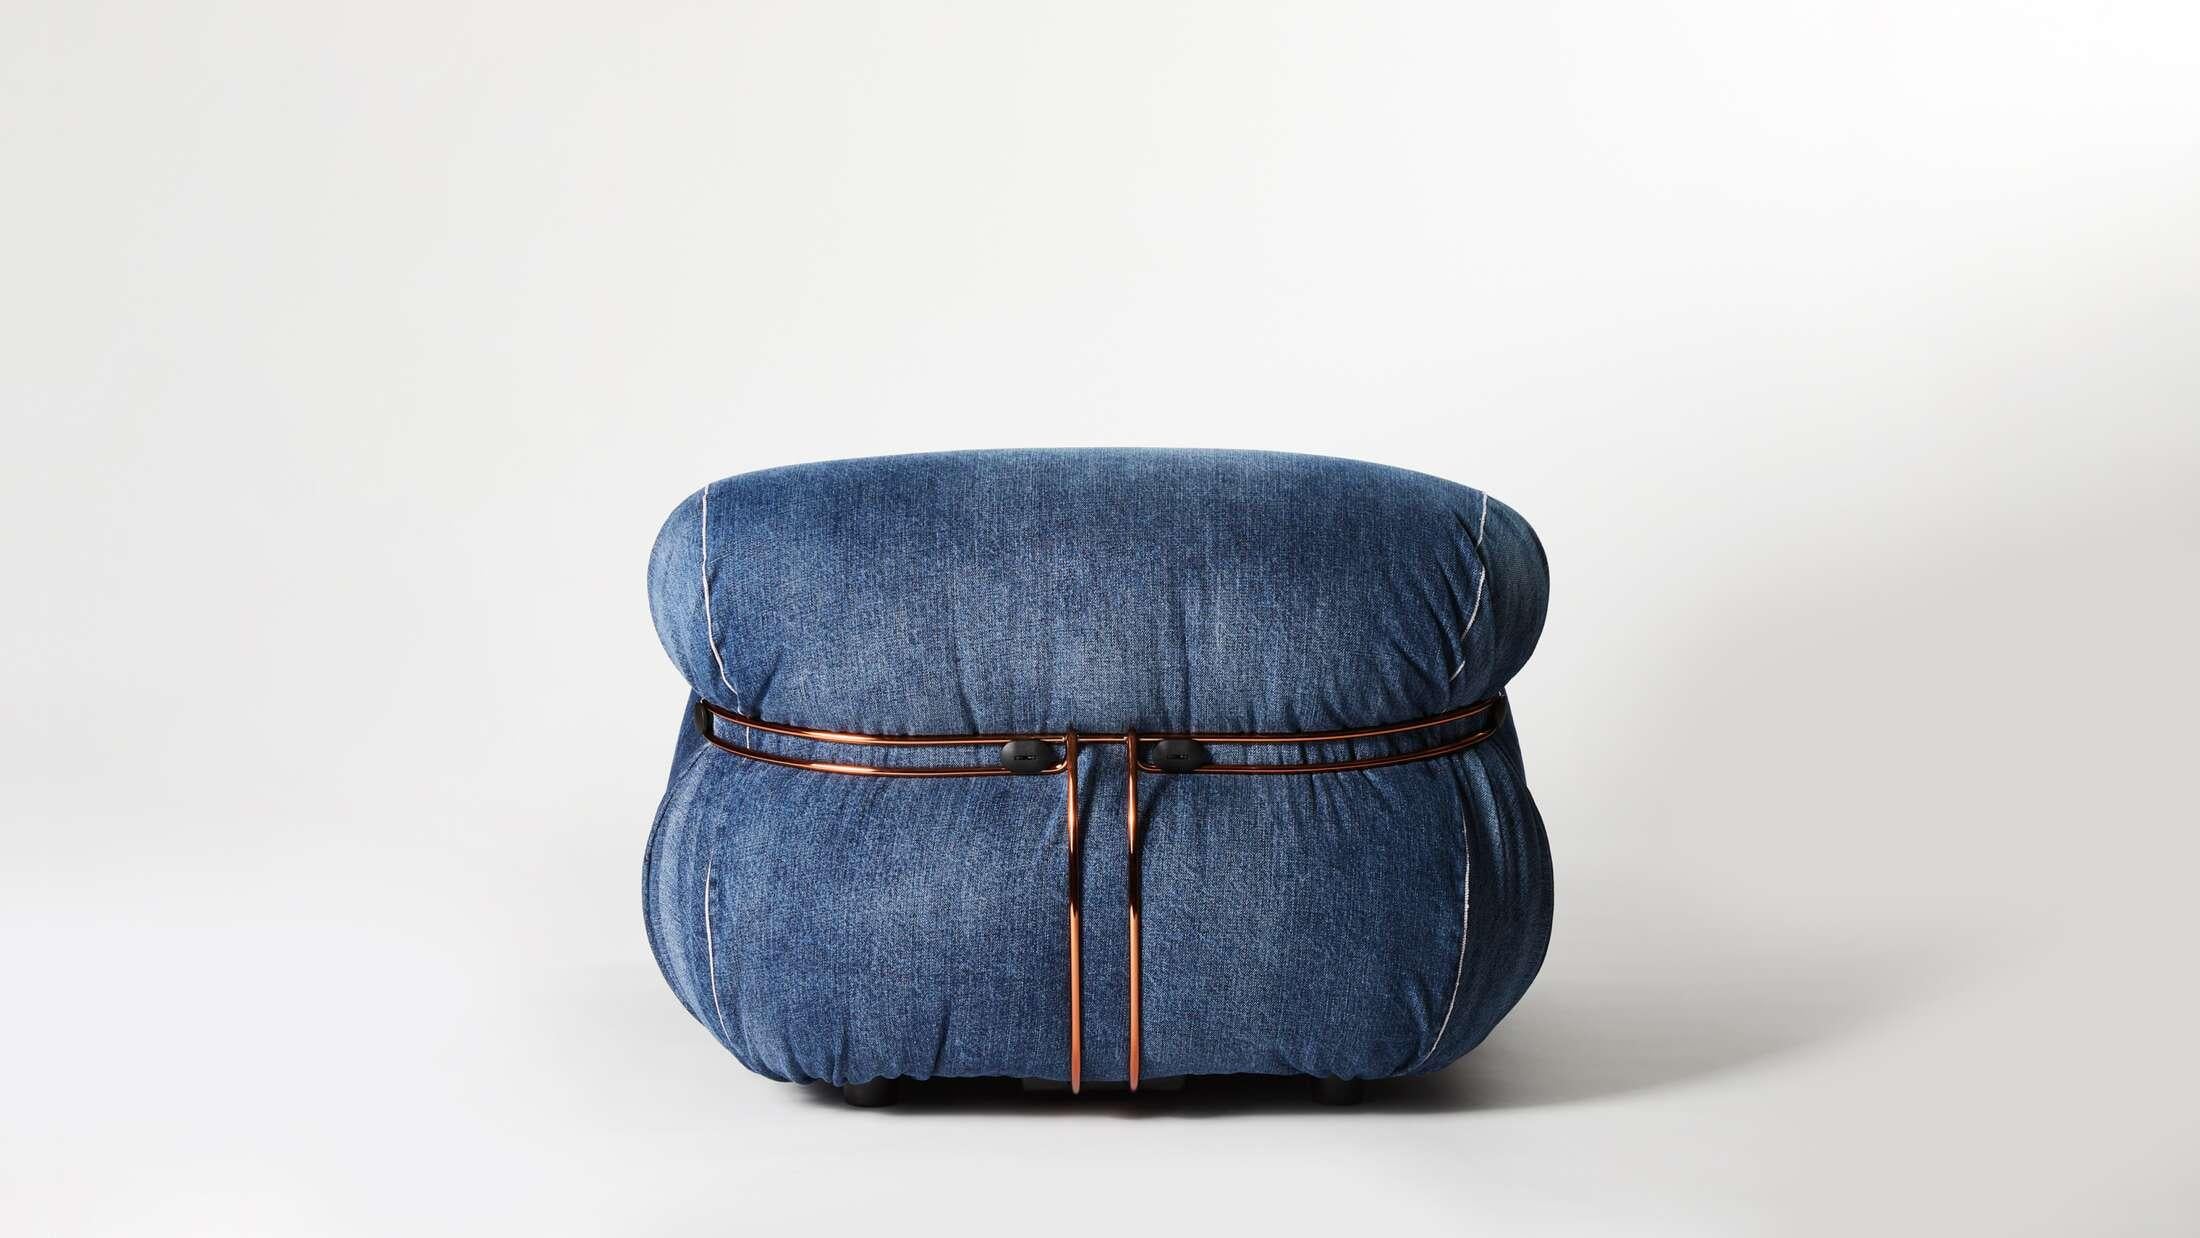 Afra And Tobia Scarpa Roy Rogers Denim Soriana Armchair 
Manufactured by Cassina

DENIM REFINEMENT BY DESIGN

The iconic contours of Soriana, the armchair by Afra & Tobia Scarpa, Compasso d’Oro award-winner in 1970, come together with the most